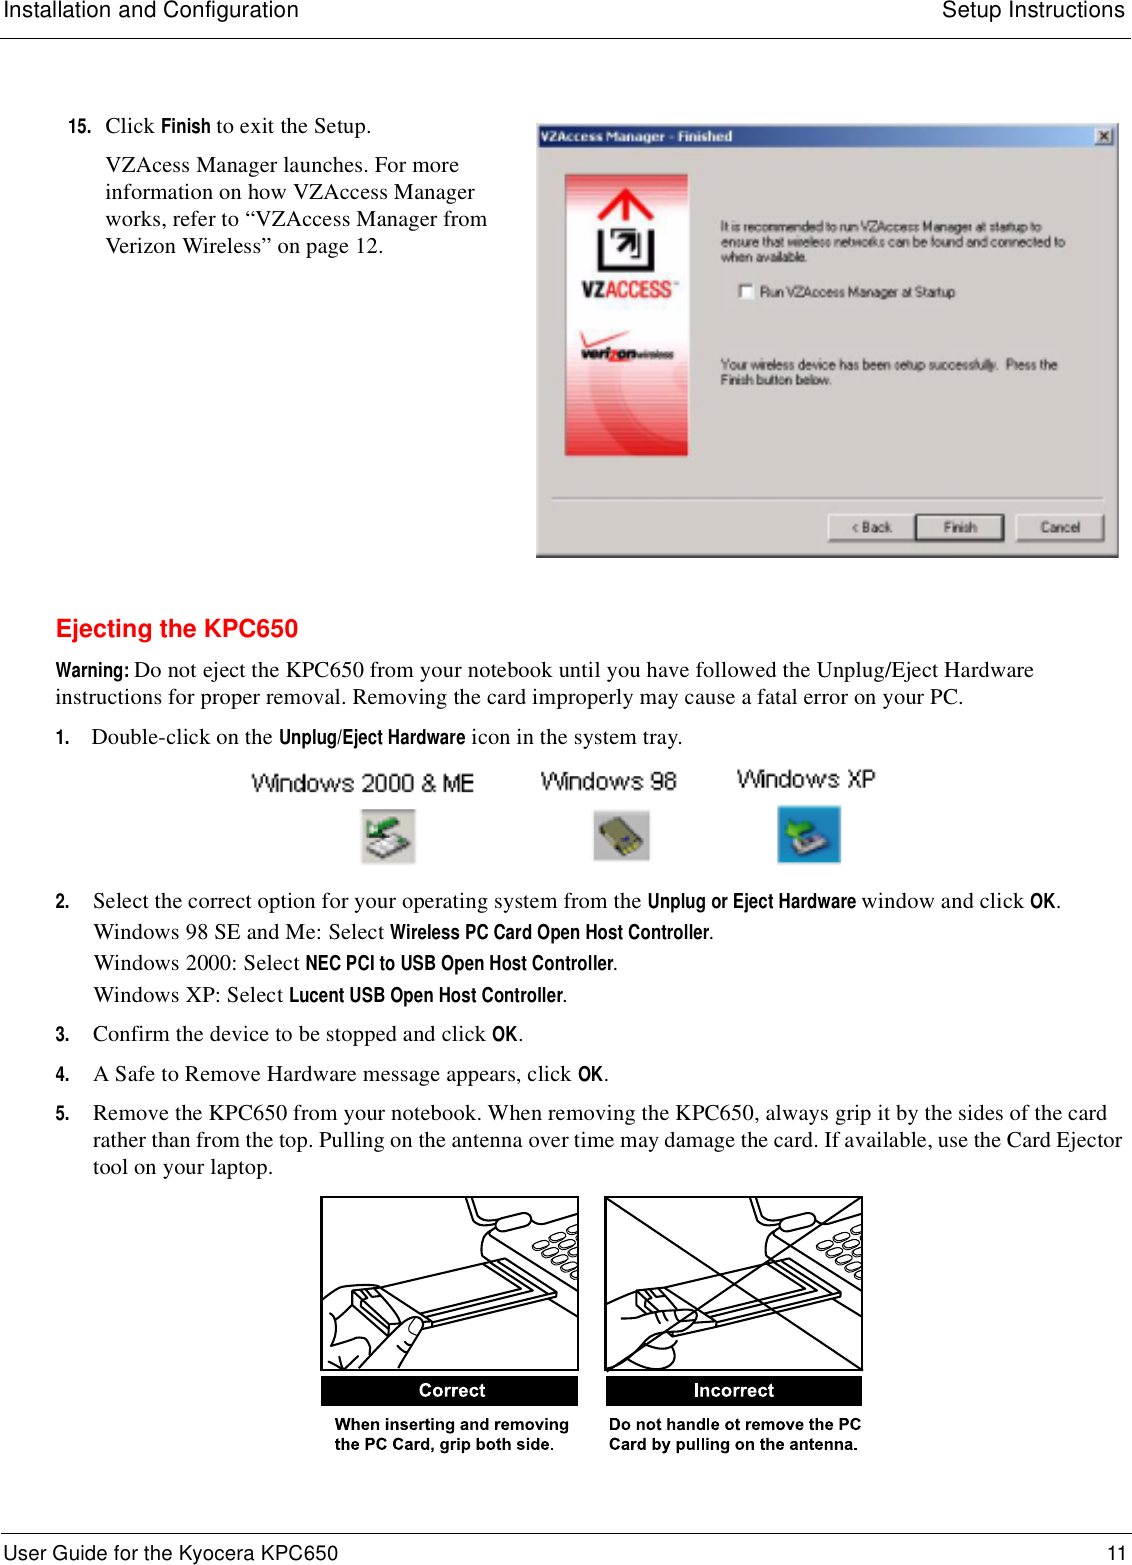 Installation and Configuration Setup InstructionsUser Guide for the Kyocera KPC650 11 Ejecting the KPC650Warning: Do not eject the KPC650 from your notebook until you have followed the Unplug/Eject Hardware instructions for proper removal. Removing the card improperly may cause a fatal error on your PC.1. Double-click on the Unplug/Eject Hardware icon in the system tray.2. Select the correct option for your operating system from the Unplug or Eject Hardware window and click OK.Windows 98 SE and Me: Select Wireless PC Card Open Host Controller.Windows 2000: Select NEC PCI to USB Open Host Controller.Windows XP: Select Lucent USB Open Host Controller.3. Confirm the device to be stopped and click OK.4. A Safe to Remove Hardware message appears, click OK. 5. Remove the KPC650 from your notebook. When removing the KPC650, always grip it by the sides of the card rather than from the top. Pulling on the antenna over time may damage the card. If available, use the Card Ejector tool on your laptop.15. Click Finish to exit the Setup.VZAcess Manager launches. For more information on how VZAccess Manager works, refer to “VZAccess Manager from Verizon Wireless” on page 12.